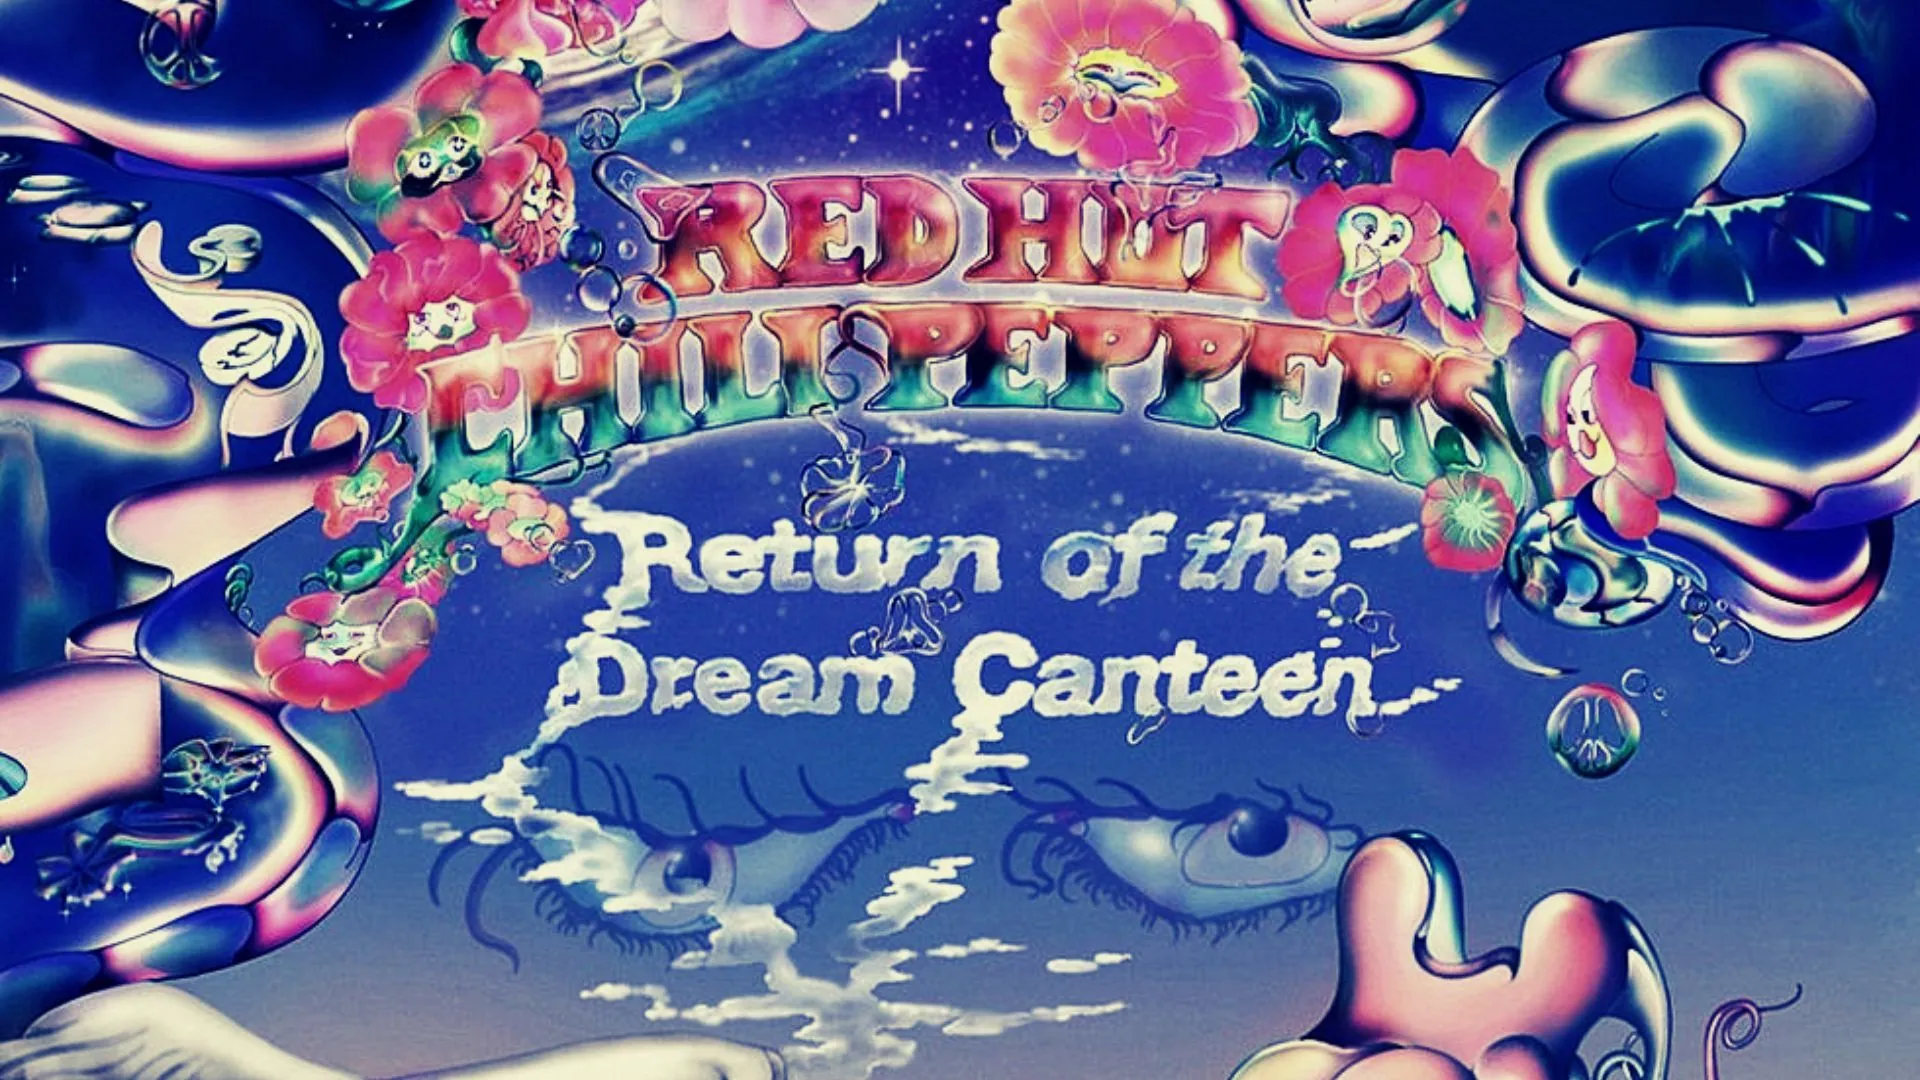 Red Hot Chili Peppers releasing LA Return of the Dream Canteen viny